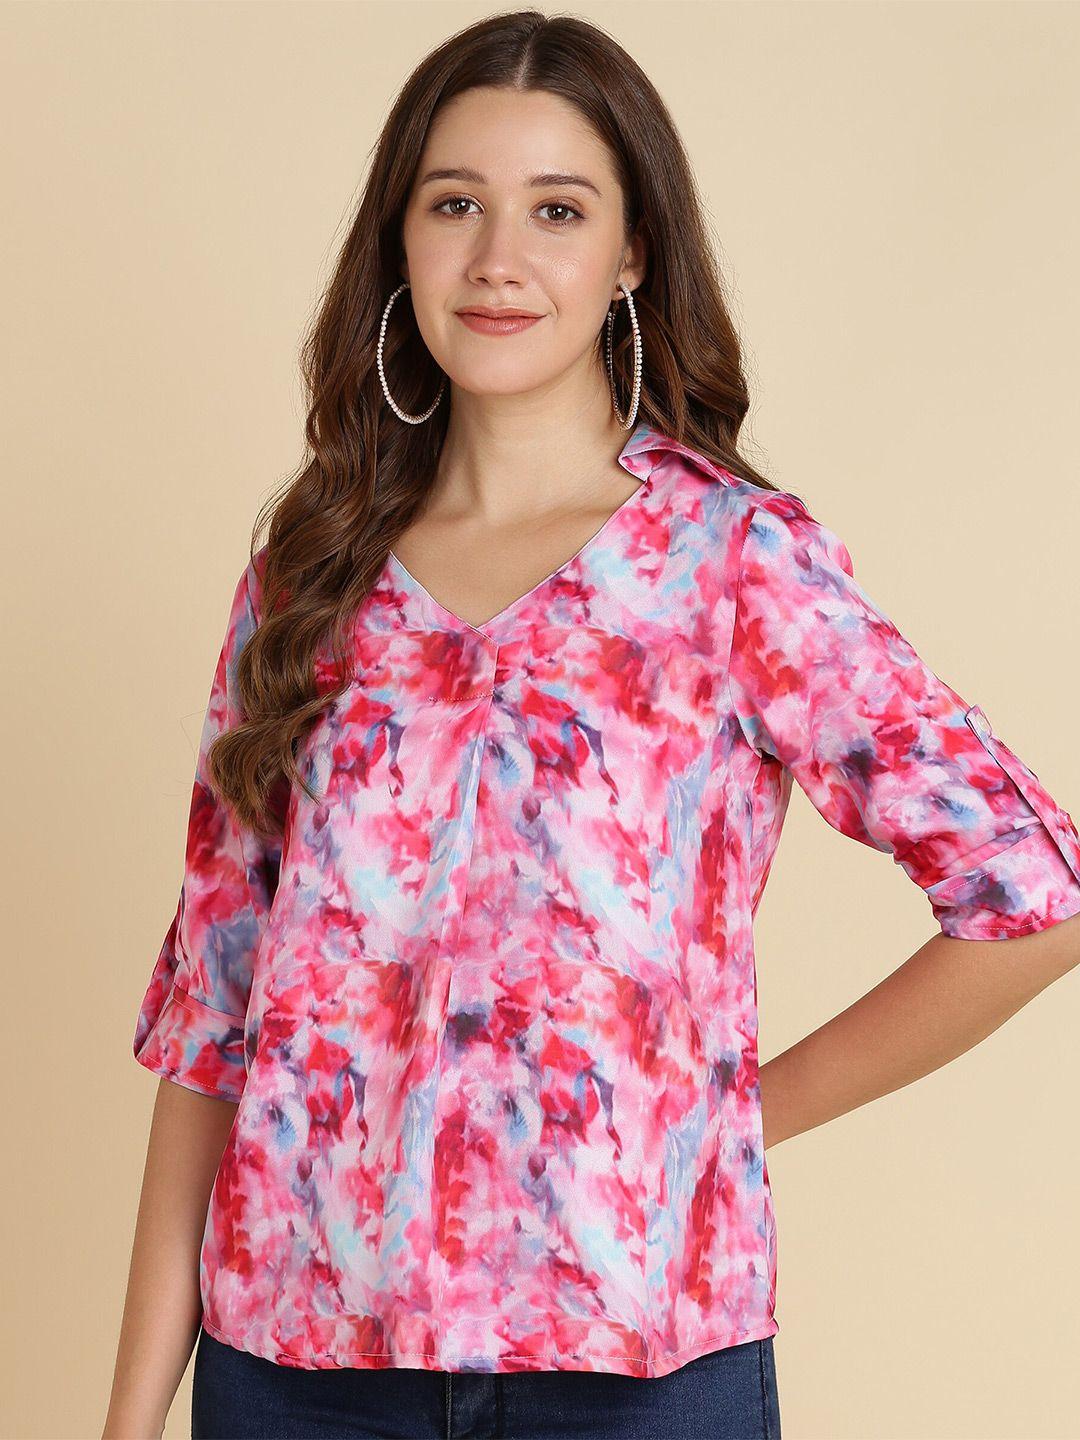 sangria v-neck tie and dye top